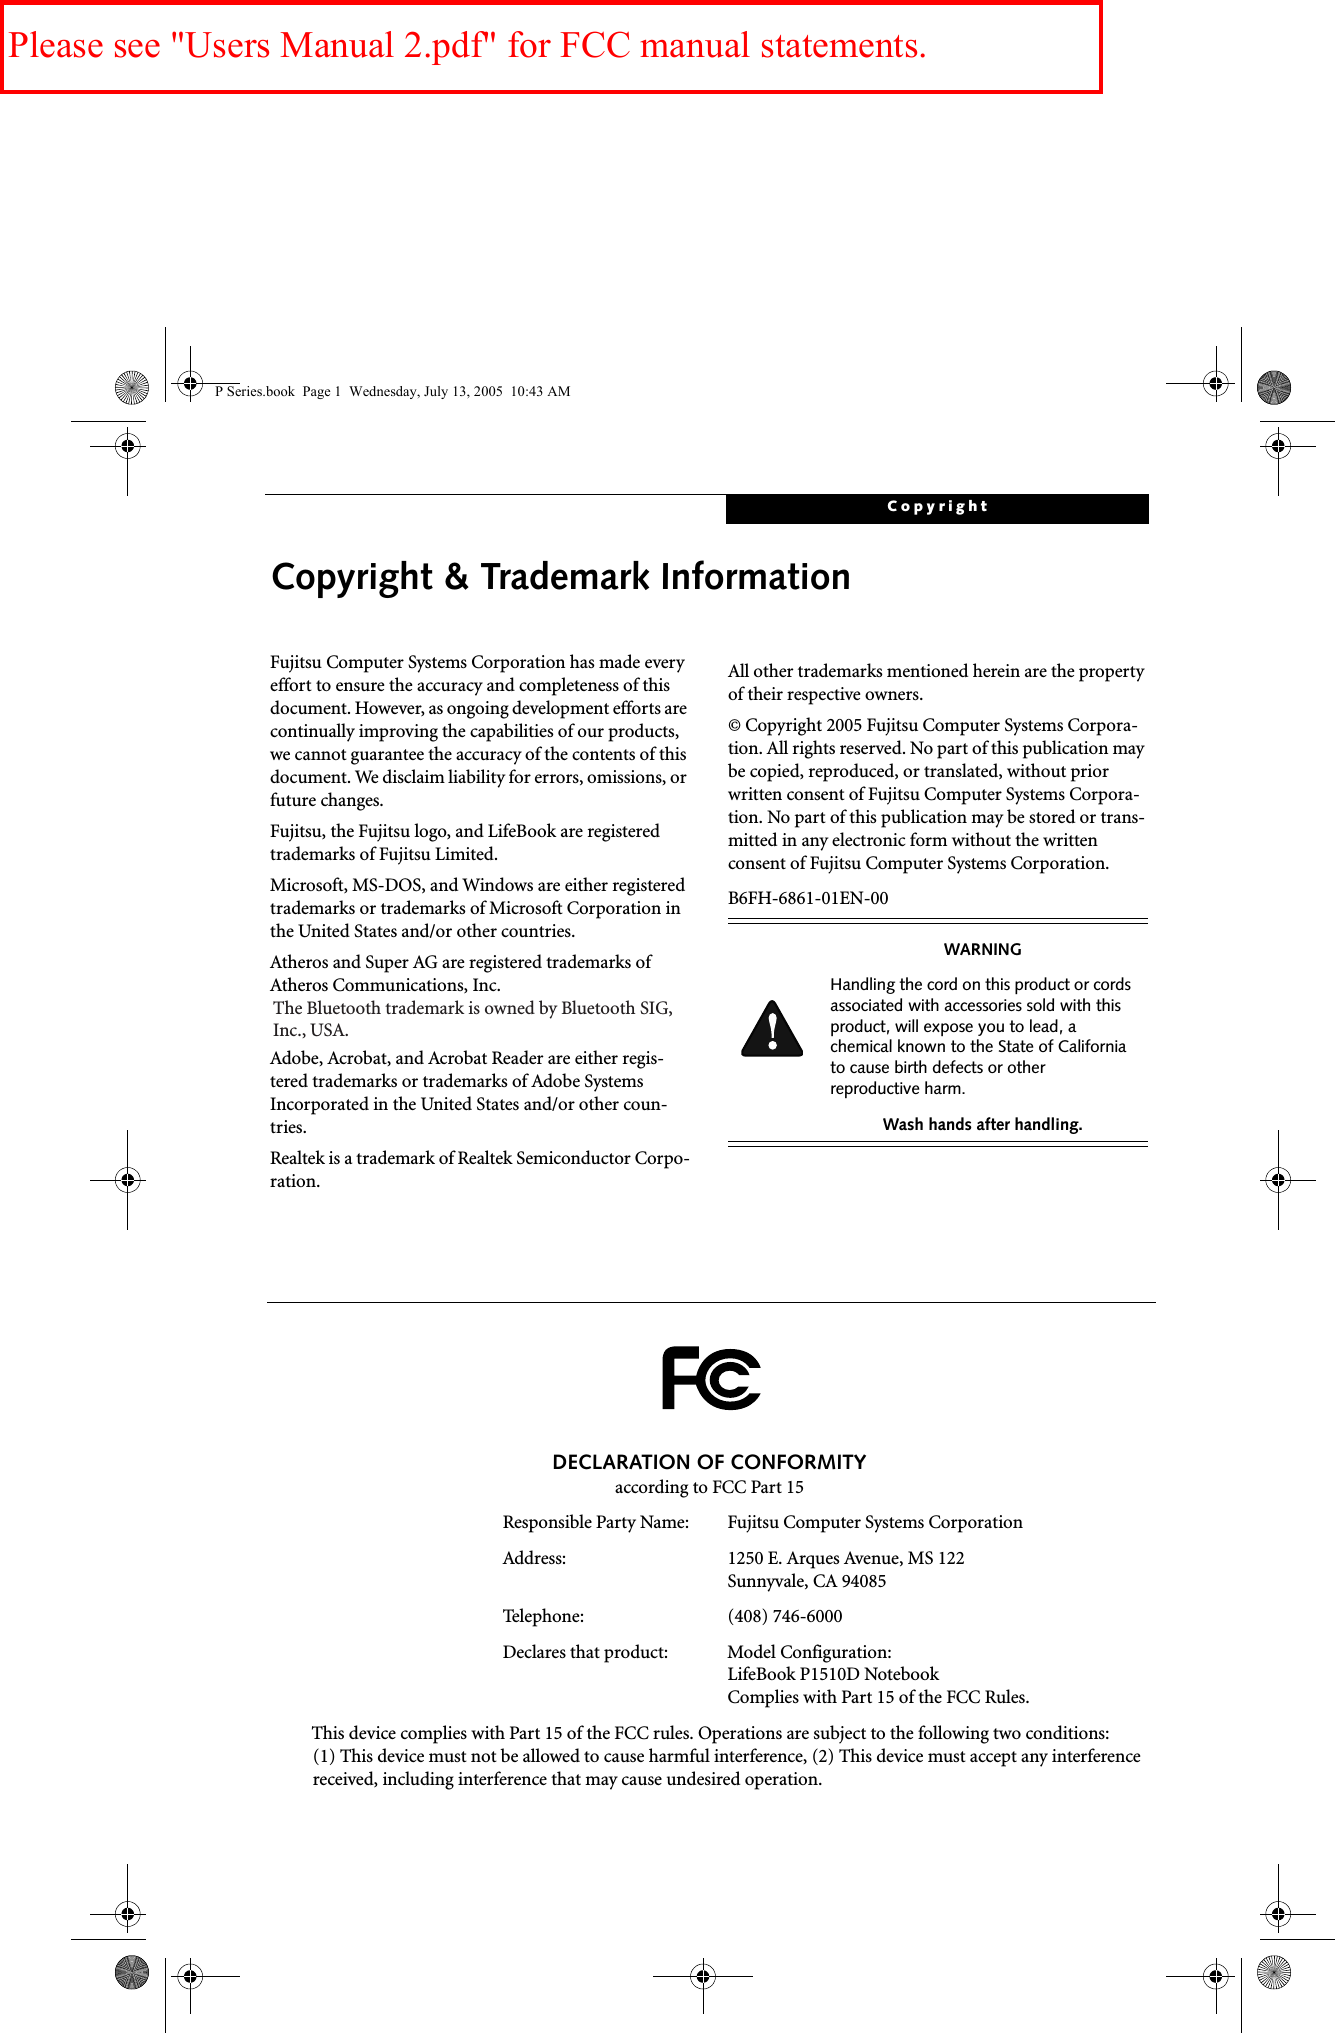 CopyrightCopyright &amp; Trademark InformationFujitsu Computer Systems Corporation has made every effort to ensure the accuracy and completeness of this document. However, as ongoing development efforts are continually improving the capabilities of our products, we cannot guarantee the accuracy of the contents of this document. We disclaim liability for errors, omissions, or future changes.Fujitsu, the Fujitsu logo, and LifeBook are registered trademarks of Fujitsu Limited.Microsoft, MS-DOS, and Windows are either registered trademarks or trademarks of Microsoft Corporation in the United States and/or other countries.Atheros and Super AG are registered trademarks of Atheros Communications, Inc.Adobe, Acrobat, and Acrobat Reader are either regis-tered trademarks or trademarks of Adobe Systems Incorporated in the United States and/or other coun-tries.Realtek is a trademark of Realtek Semiconductor Corpo-ration.  All other trademarks mentioned herein are the property of their respective owners.© Copyright 2005 Fujitsu Computer Systems Corpora-tion. All rights reserved. No part of this publication may be copied, reproduced, or translated, without prior written consent of Fujitsu Computer Systems Corpora-tion. No part of this publication may be stored or trans-mitted in any electronic form without the written consent of Fujitsu Computer Systems Corporation.B6FH-6861-01EN-00WARNINGHandling the cord on this product or cords associated with accessories sold with this product, will expose you to lead, a chemical known to the State of California to cause birth defects or other reproductive harm. Wash hands after handling.DECLARATION OF CONFORMITYaccording to FCC Part 15Responsible Party Name: Fujitsu Computer Systems CorporationAddress:  1250 E. Arques Avenue, MS 122Sunnyvale, CA 94085Telephone: (408) 746-6000Declares that product: Model Configuration:LifeBook P1510D Notebook Complies with Part 15 of the FCC Rules.This device complies with Part 15 of the FCC rules. Operations are subject to the following two conditions:(1) This device must not be allowed to cause harmful interference, (2) This device must accept any interference received, including interference that may cause undesired operation.P Series.book  Page 1  Wednesday, July 13, 2005  10:43 AMThe Bluetooth trademark is owned by Bluetooth SIG, Inc., USA.Please see &quot;Users Manual 2.pdf&quot; for FCC manual statements.